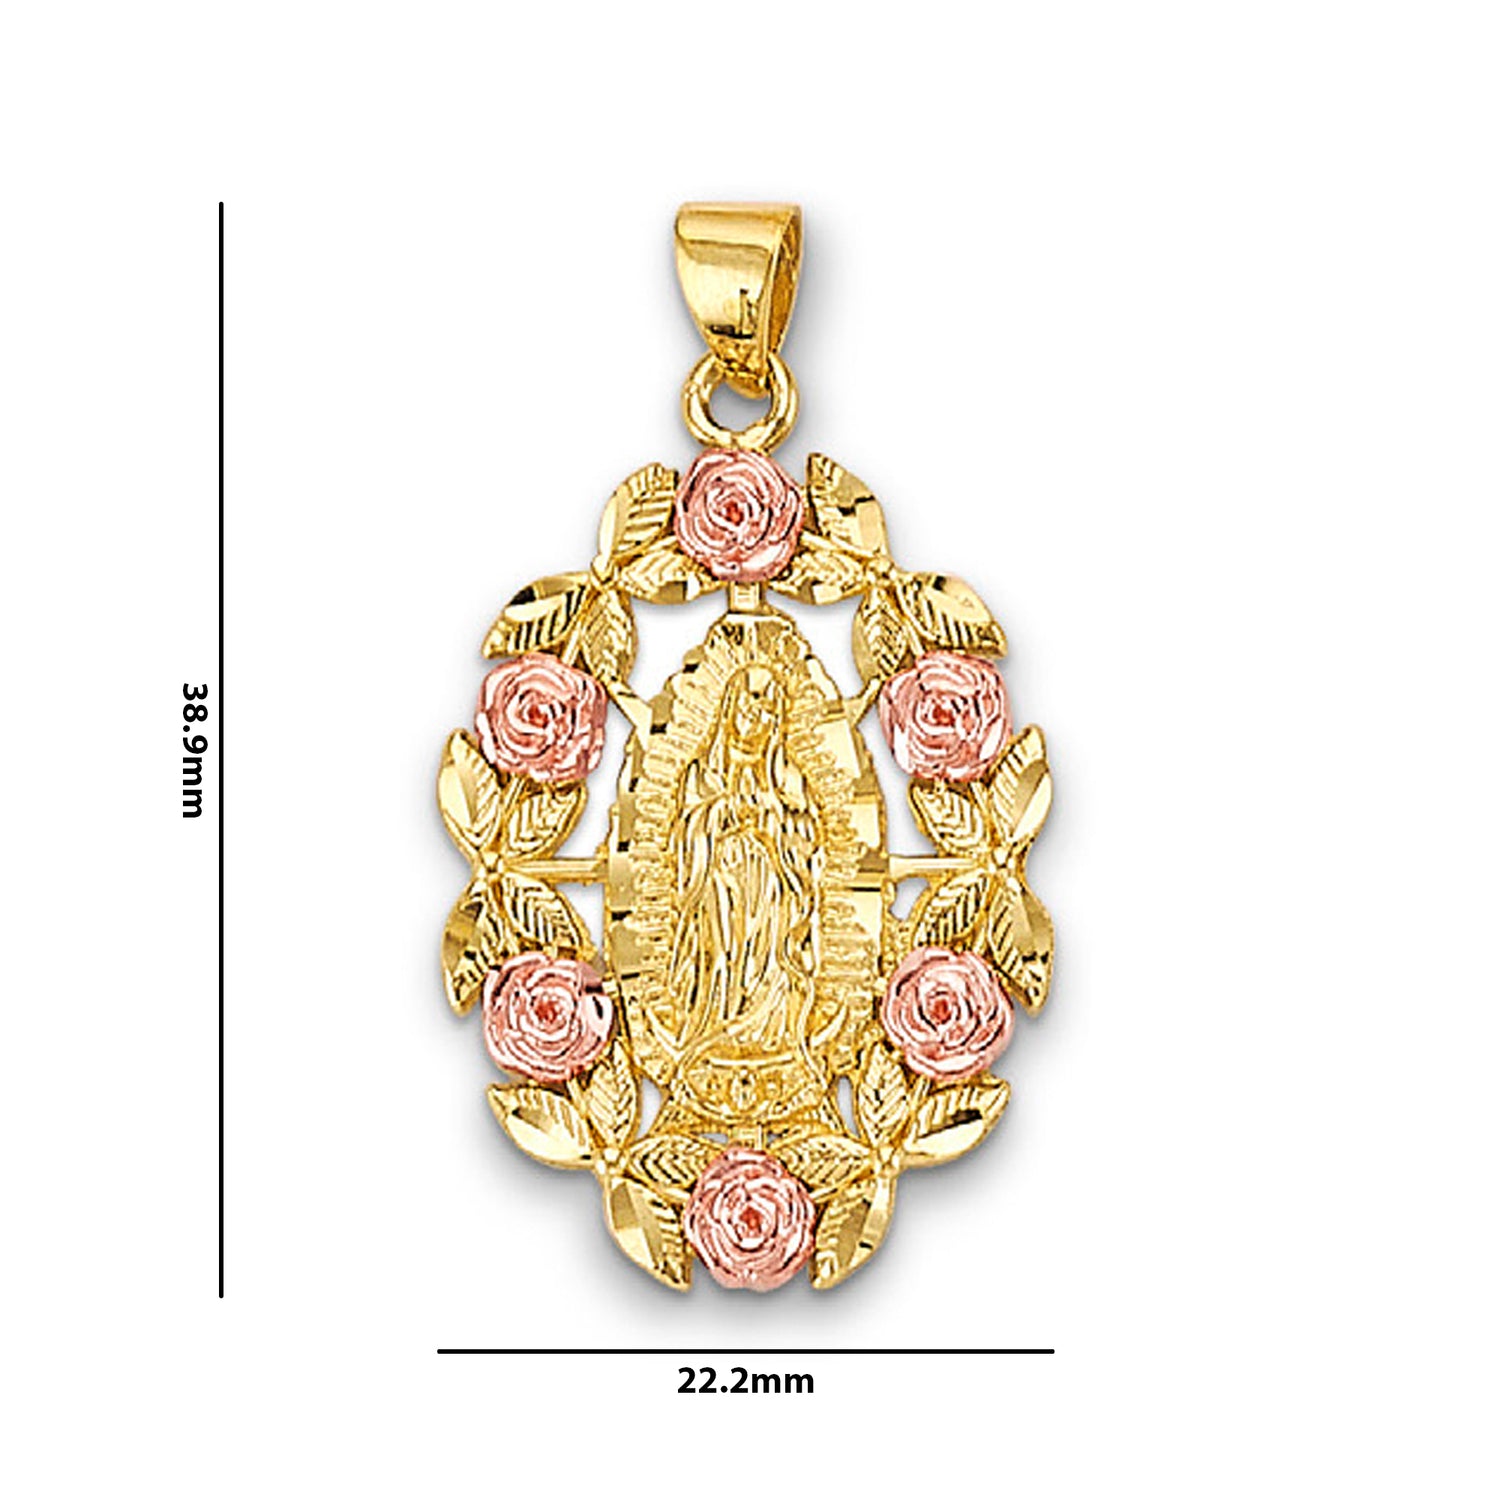 Two Tone Gold Rose Border Lady of Guadalupe Religious Pendant with Measurement